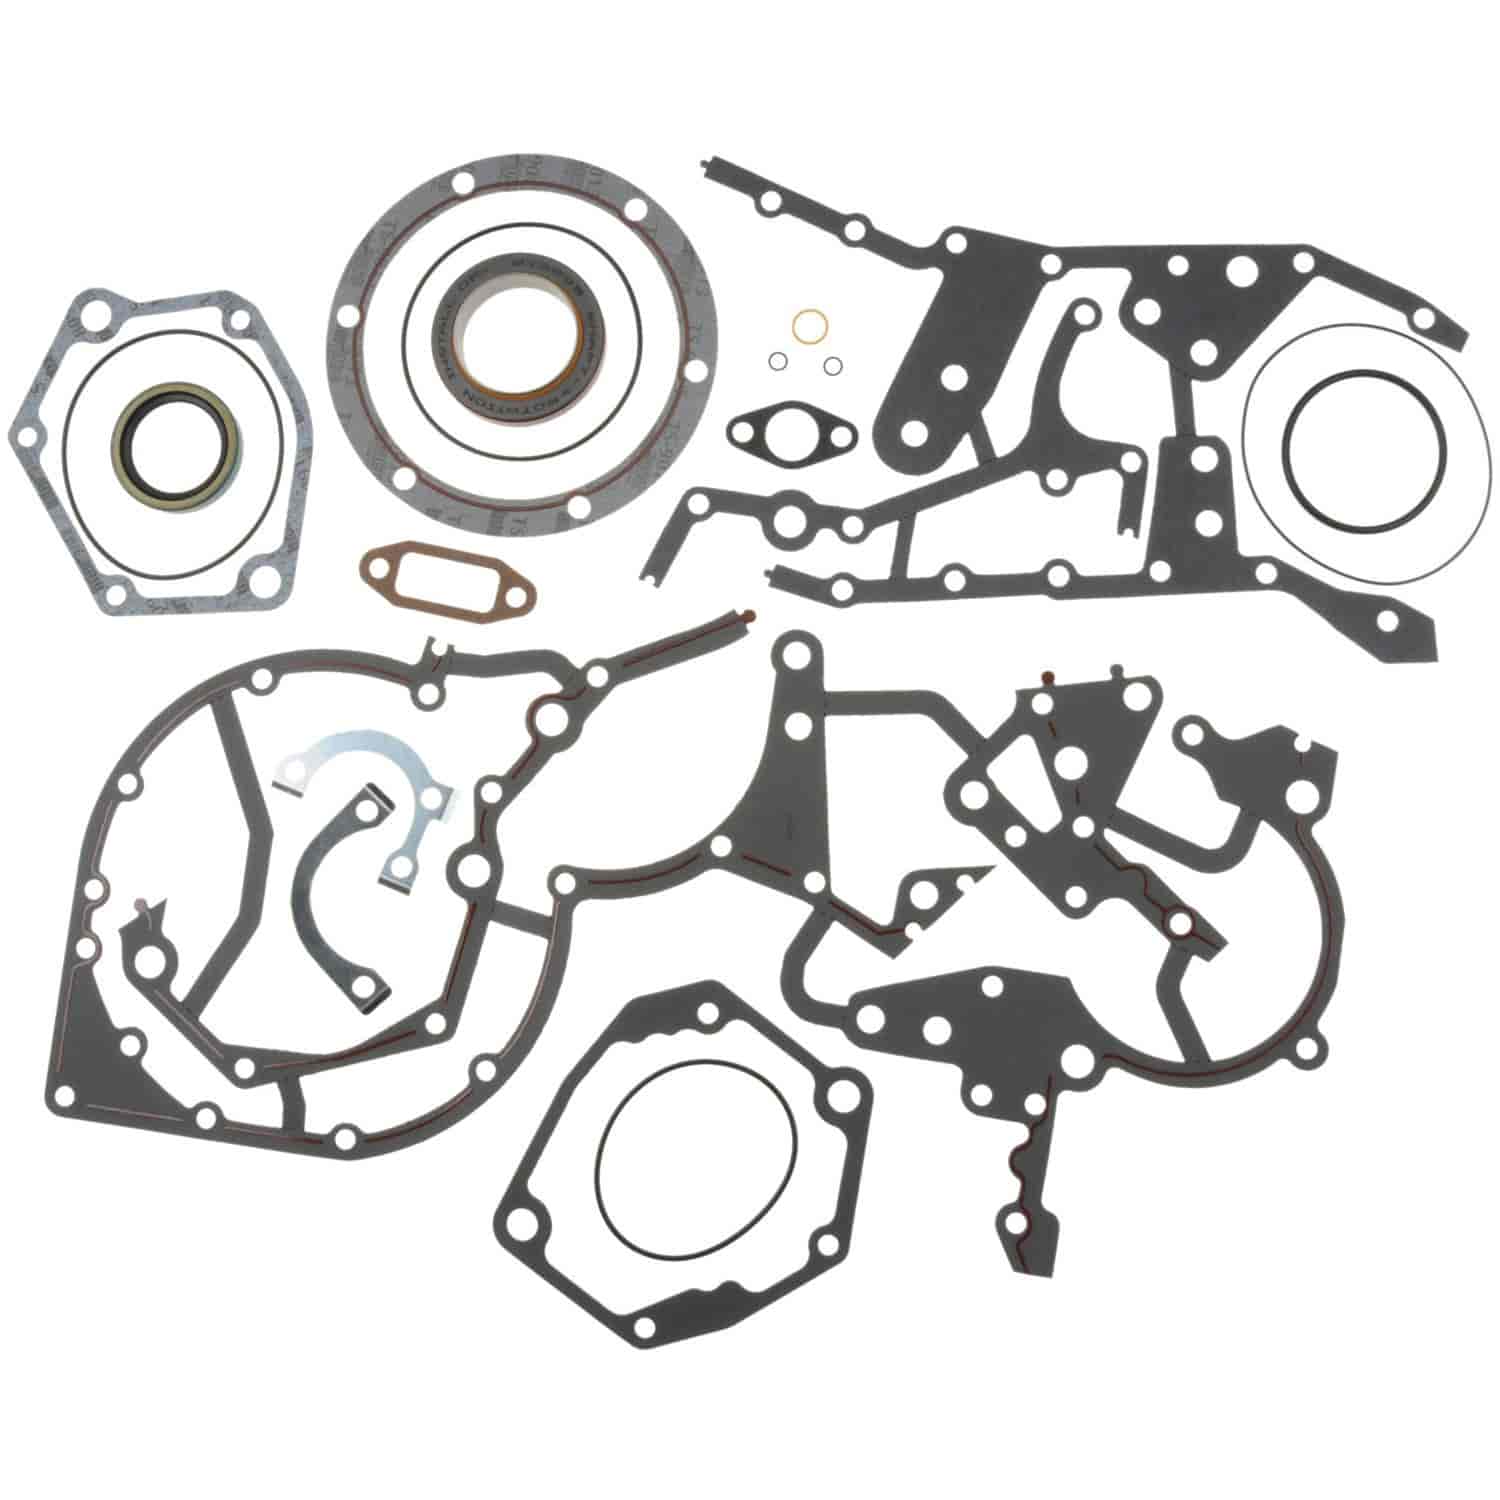 Timing Cover Set Caterpillar 3304 and 3306 Engines